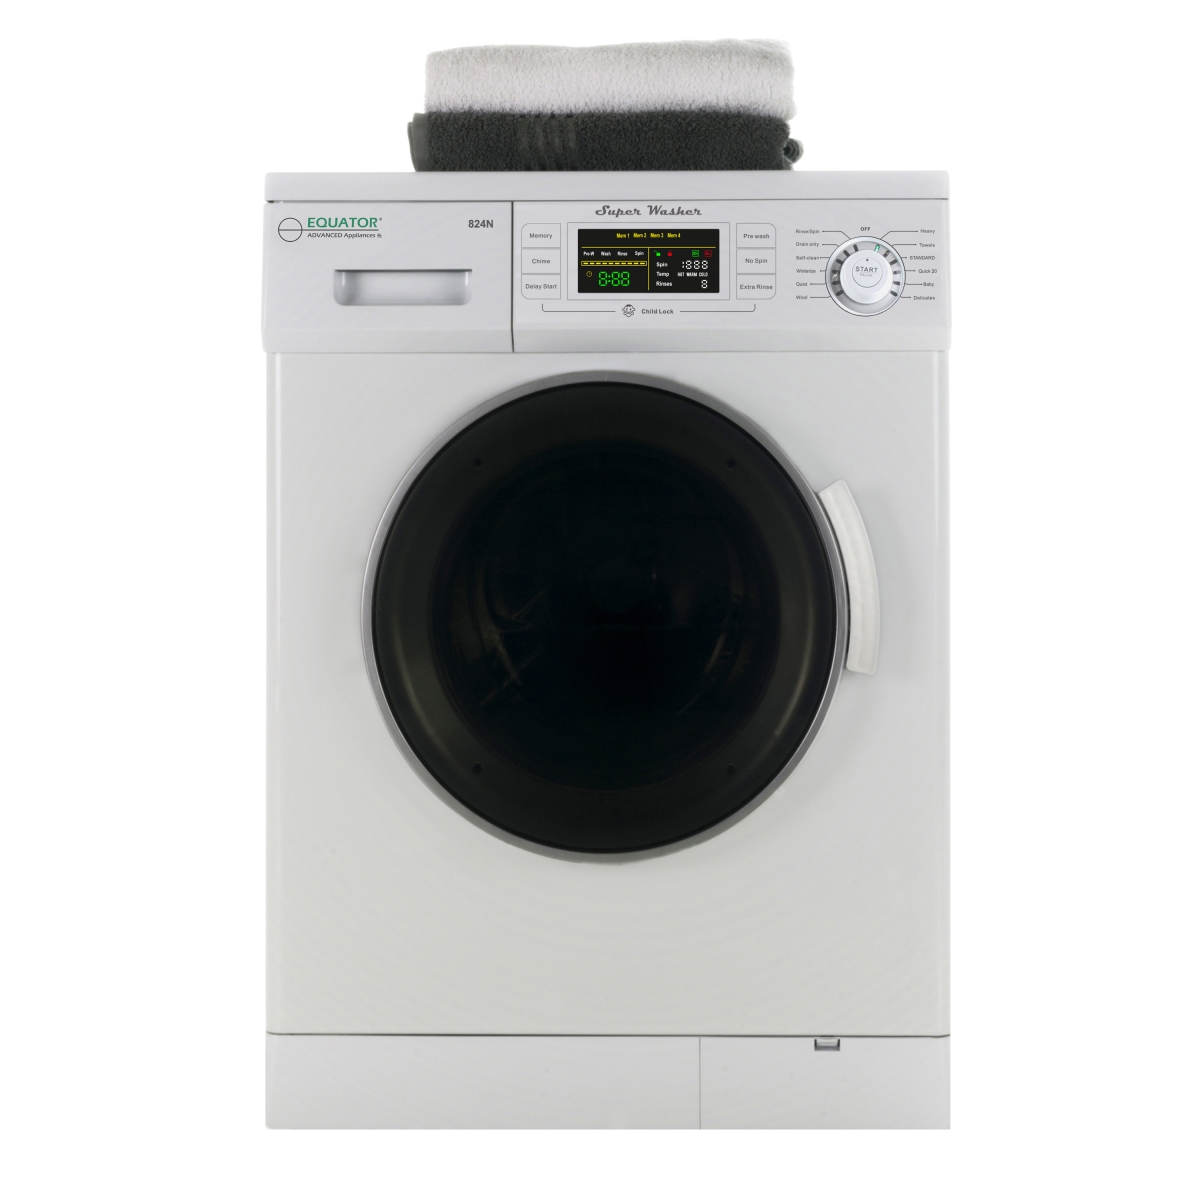 Ew 824 N 1.6 Cu. Ft. Compact Front Load Washer & Automatic Water Level